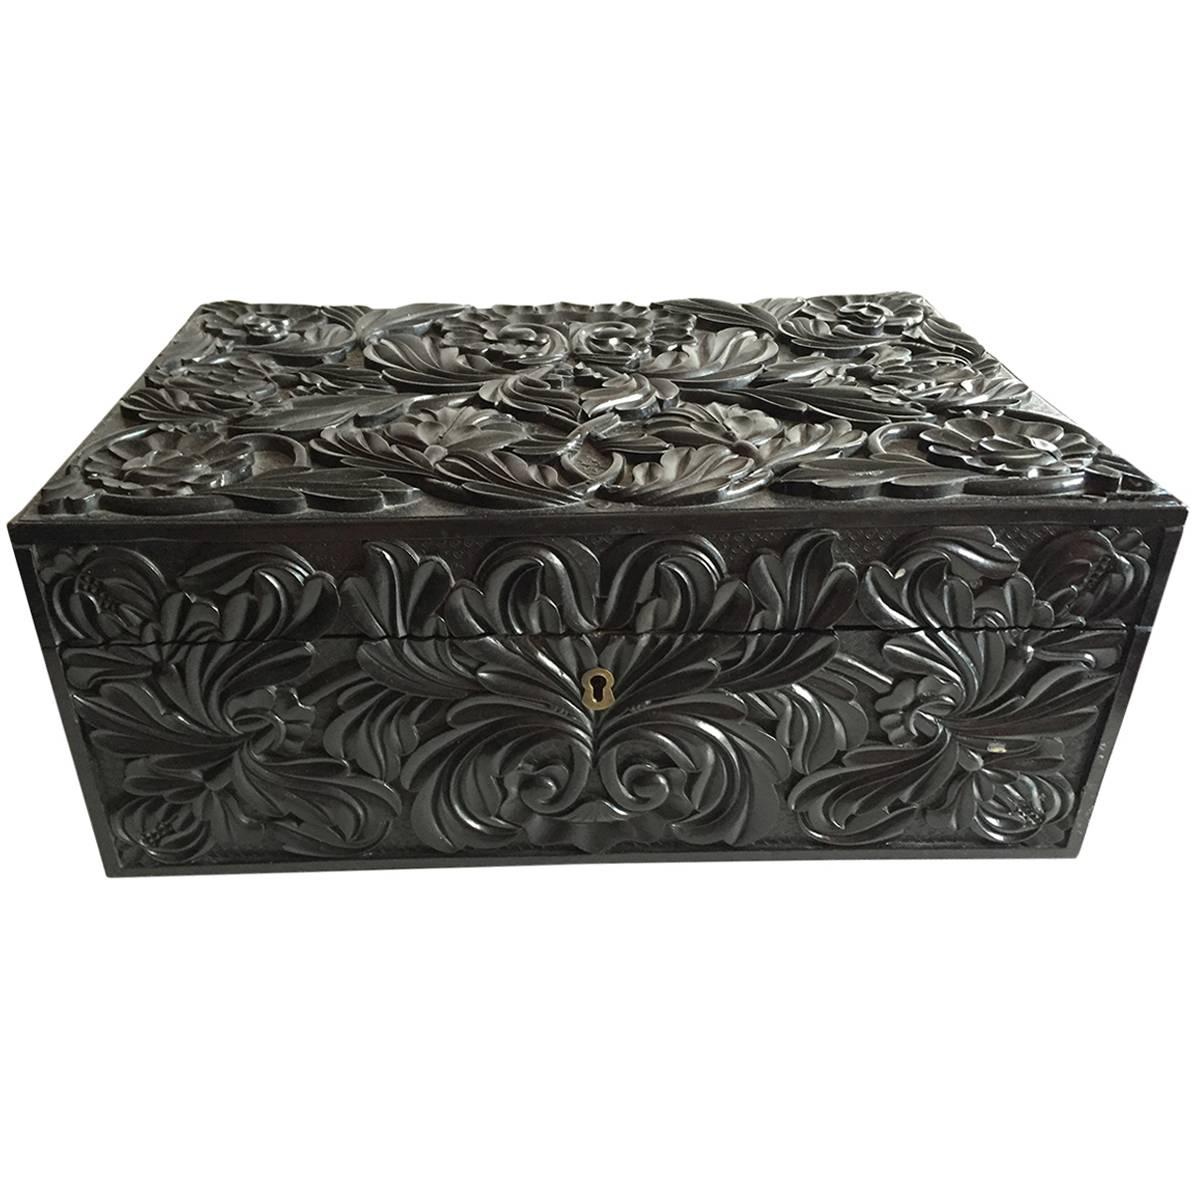 Antique Victorian Solid Ebony Carved Anglo-Indian Rectangular Box